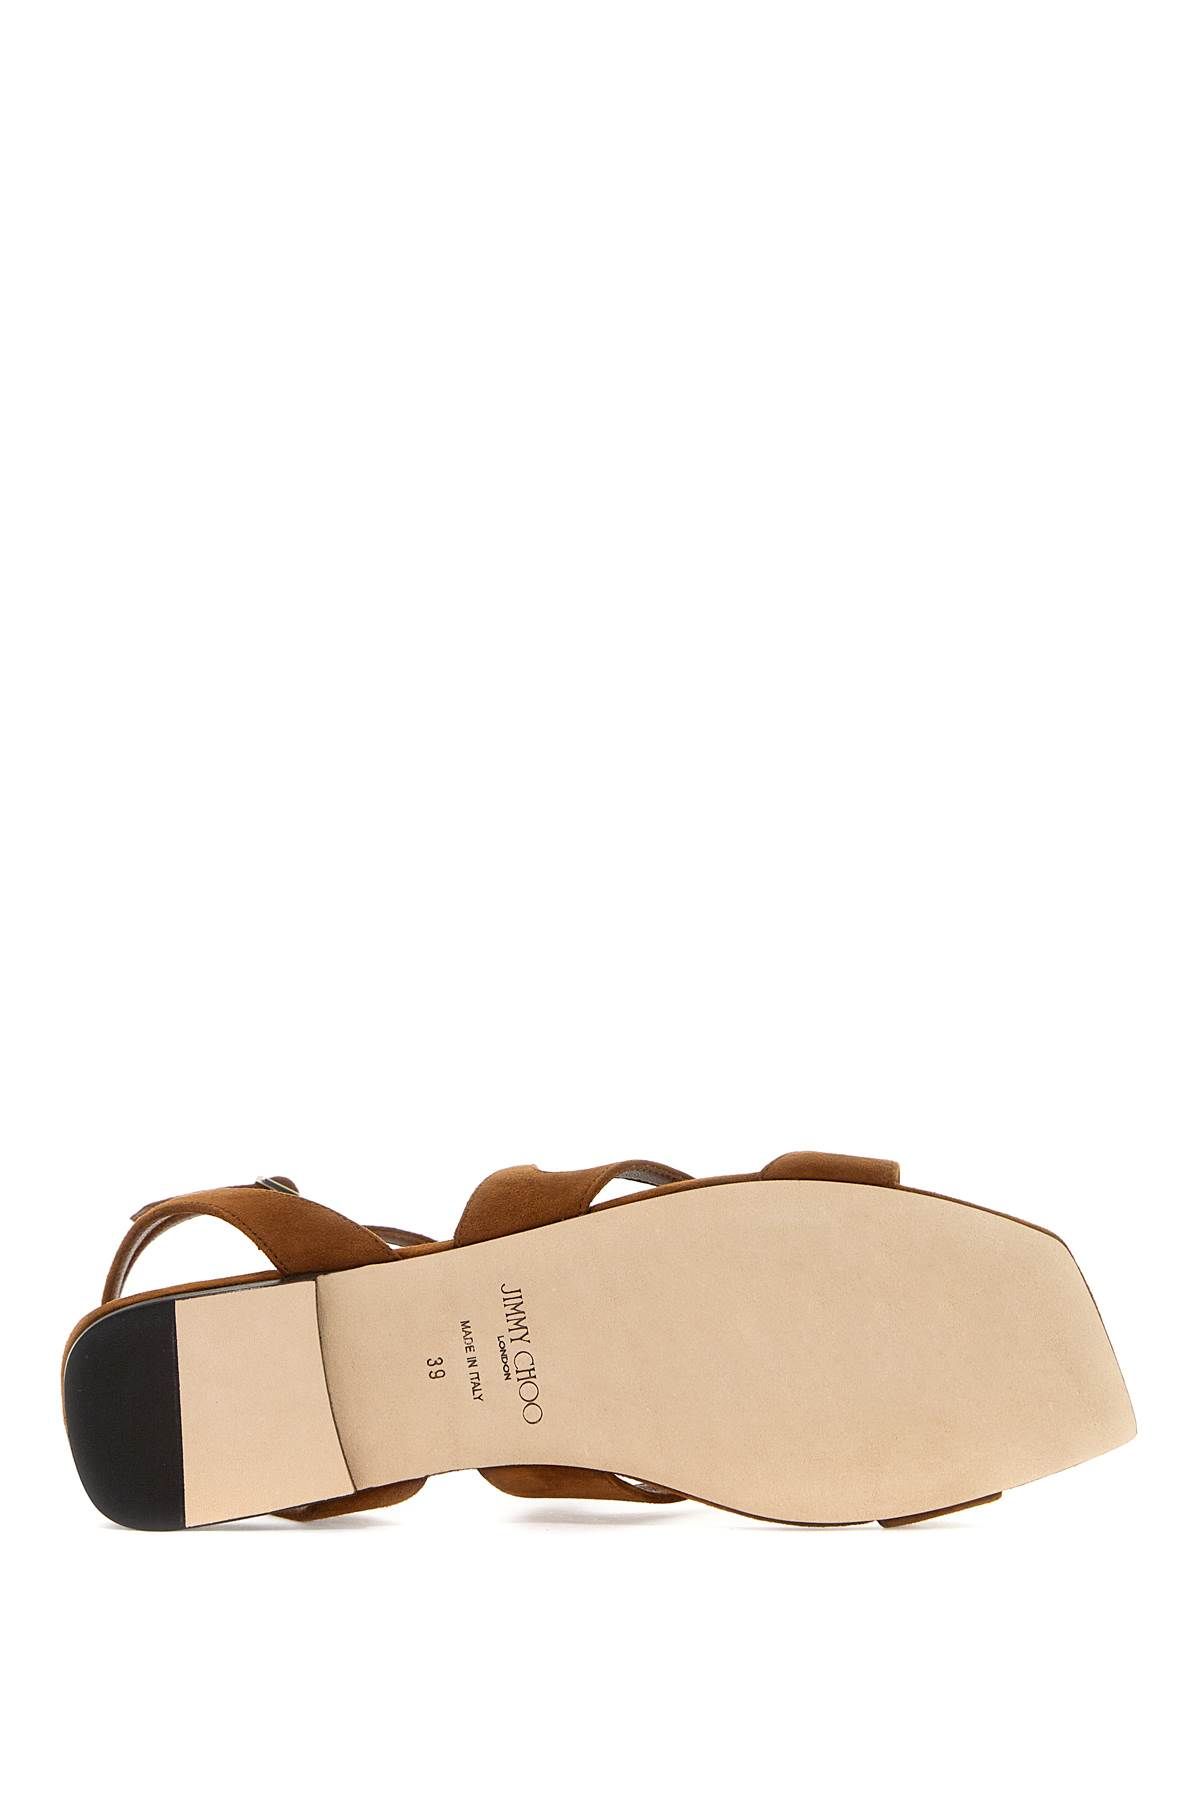 Shop Jimmy Choo Ayla Flat Suede Leather Sandals In Brown